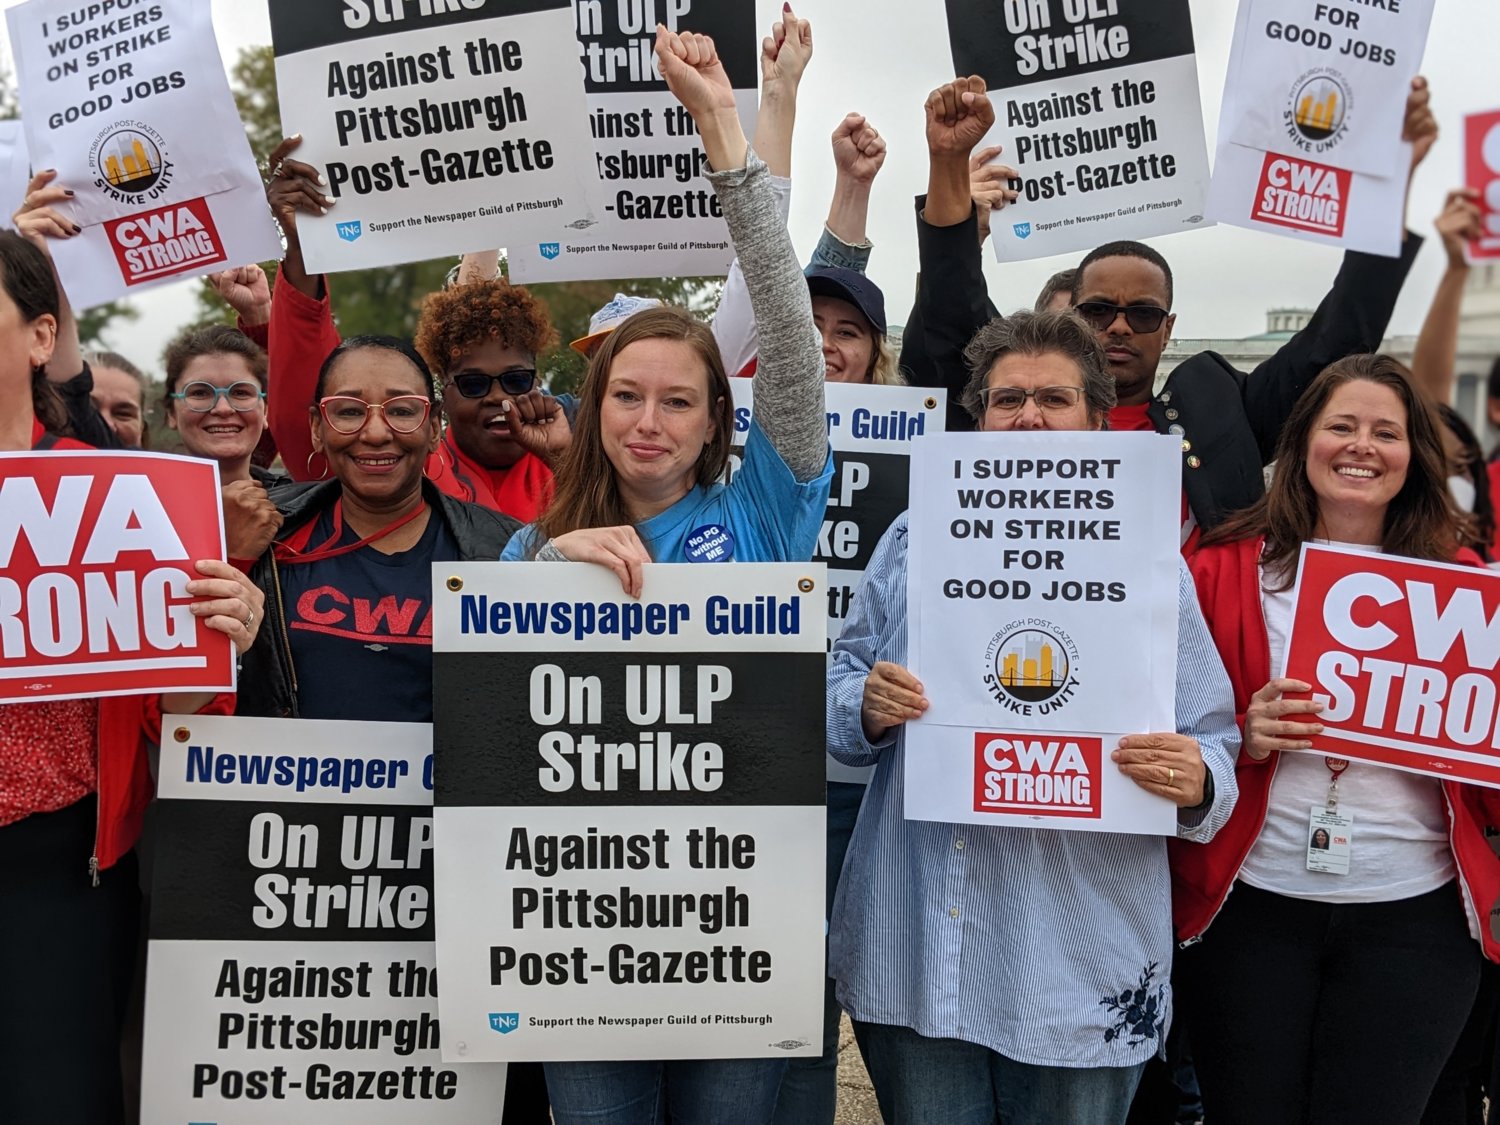 Members of the Newspaper Guild of Pittsburgh and the Communication Workers of America Union (CWA) show solidarity as the strike continues in Pittsburgh. (Photo by Pittsburgh Union Progress)